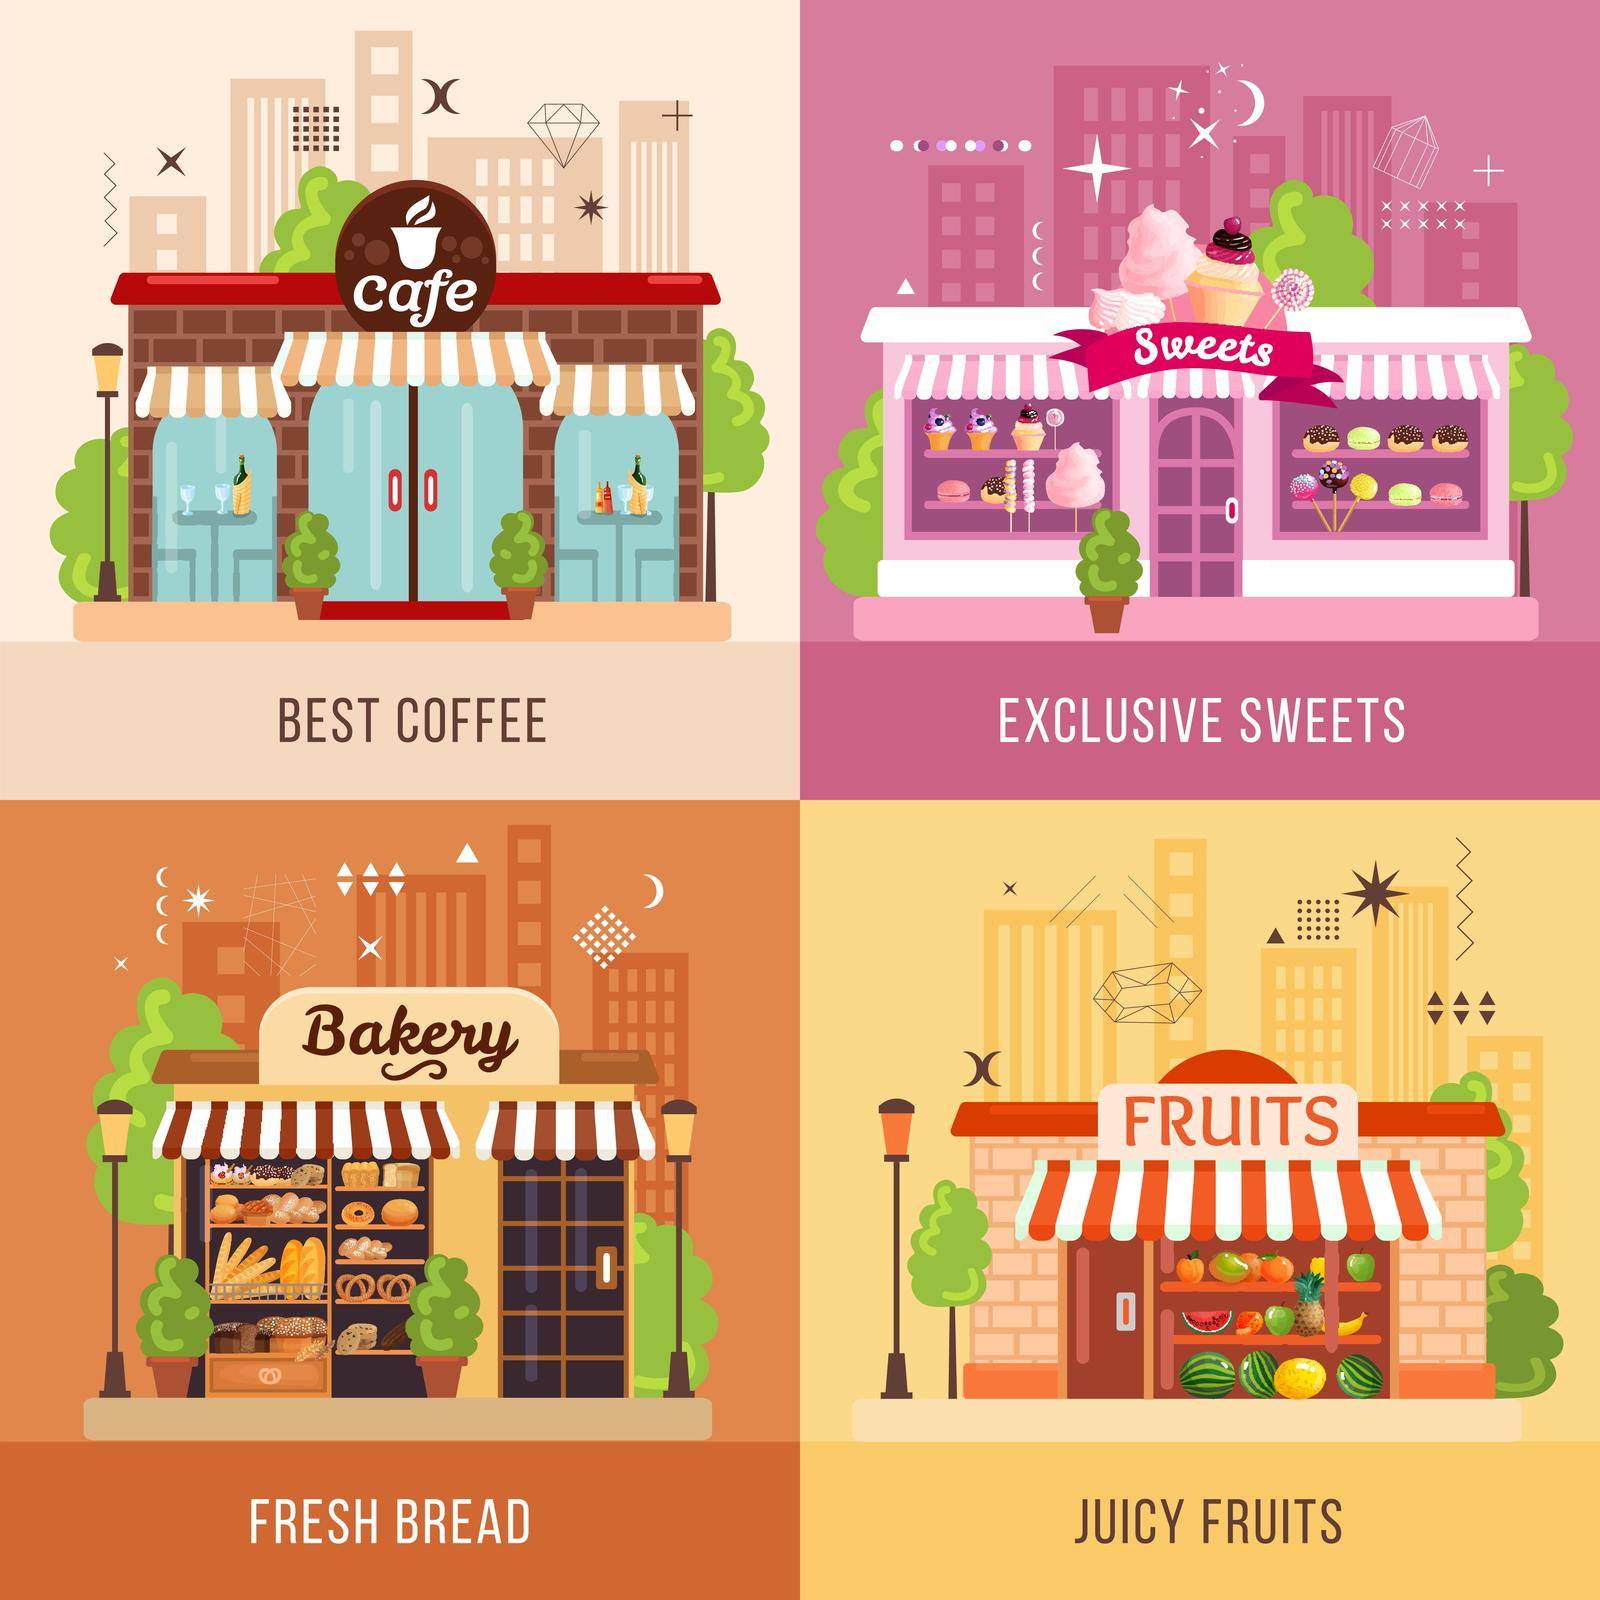 Stores facades 2x2 design concept set of exclusive sweets fresh bread juicy fruits and best coffee square icons vector illustration